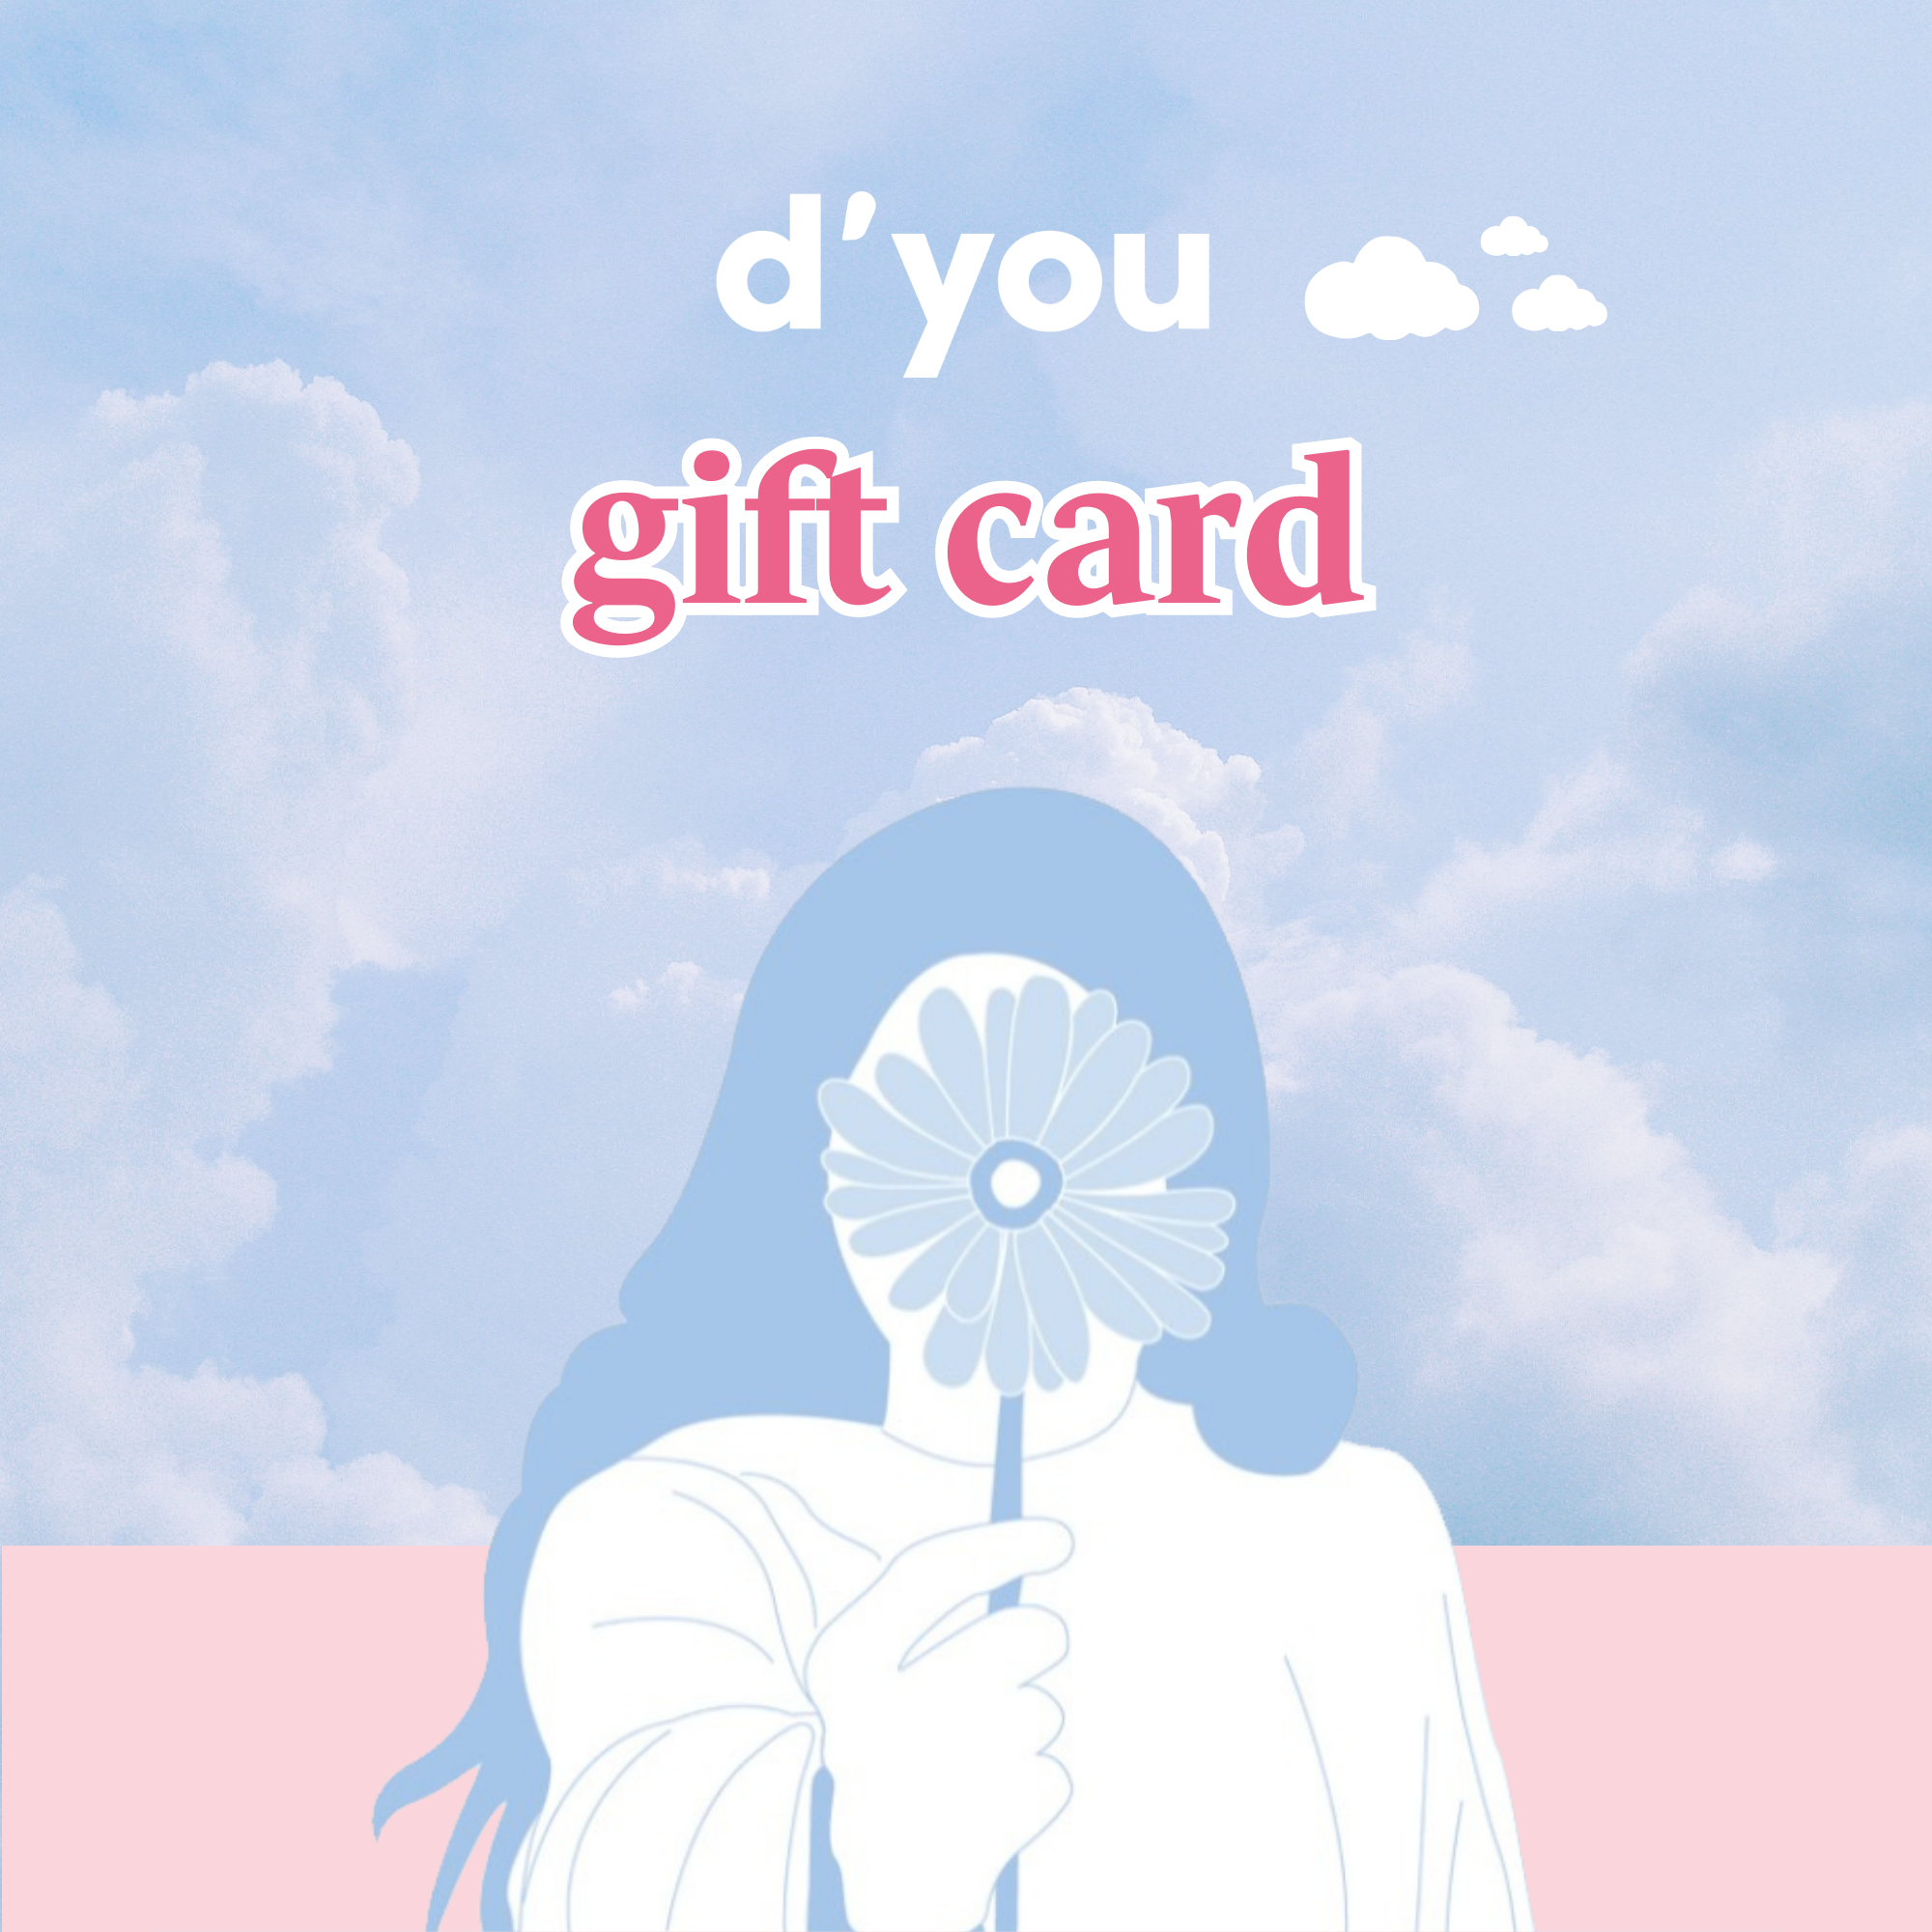 d'you gift card-1